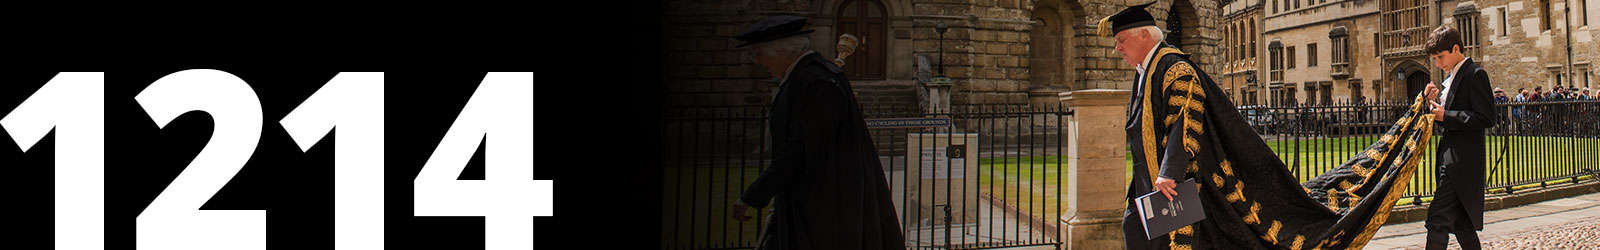 1214 header image for History timeline, date and image depicting current Chancellor, The Rt Hon the Lord Patten of Barnes